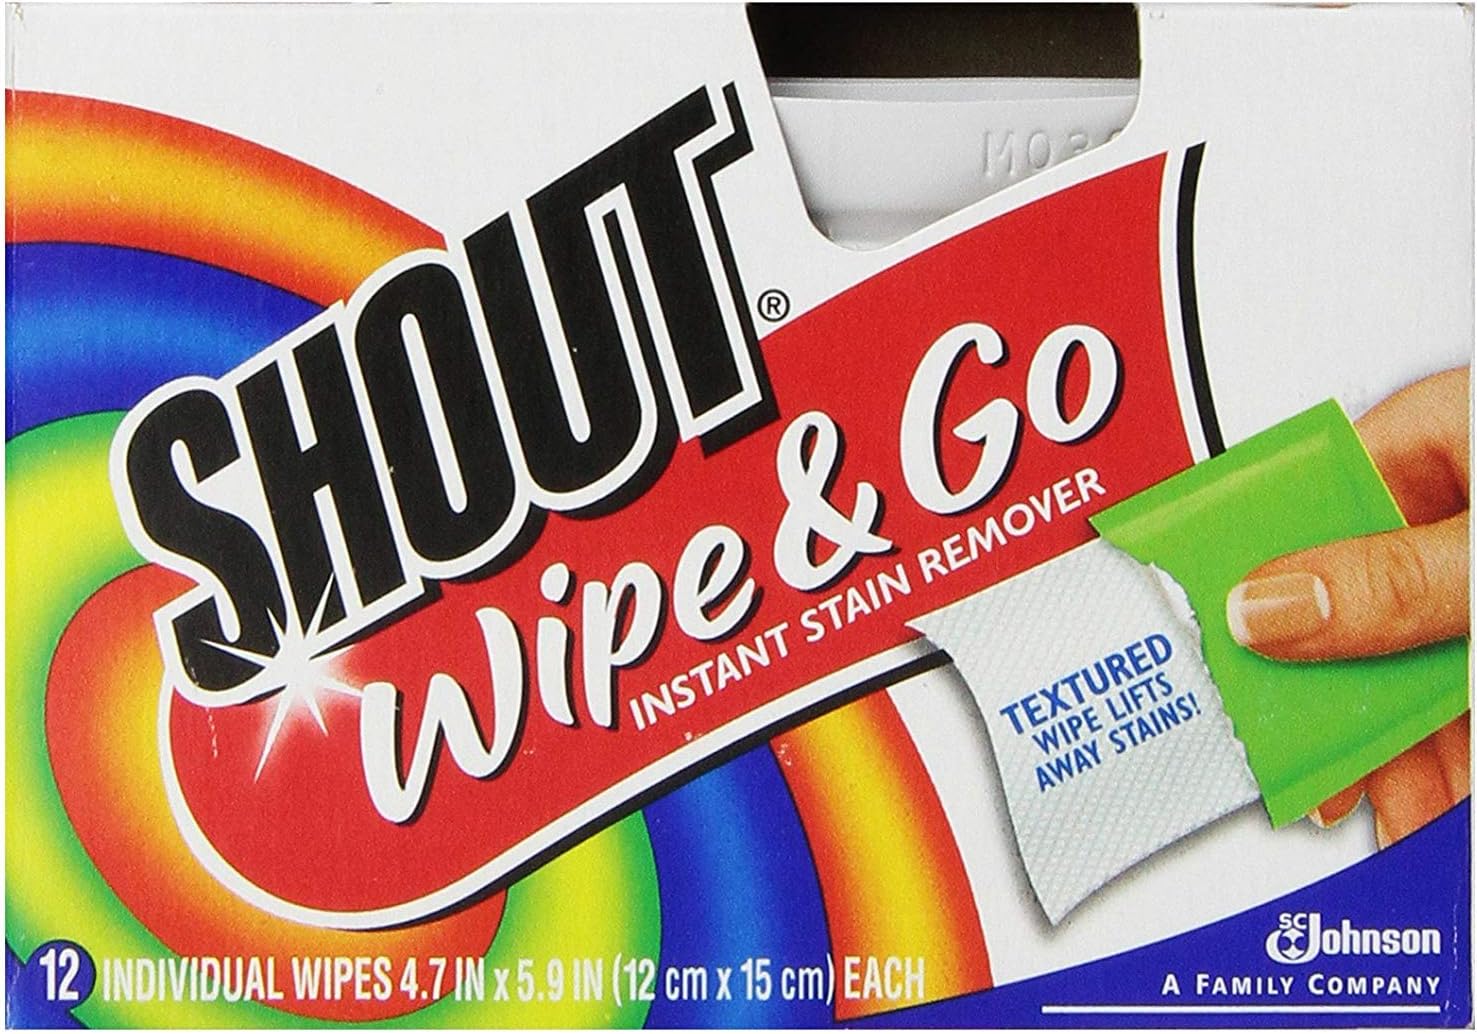 Shout Wipe & Go Instant Stain Remover Wipes, 12 CT (12 Pack of 12), Multi